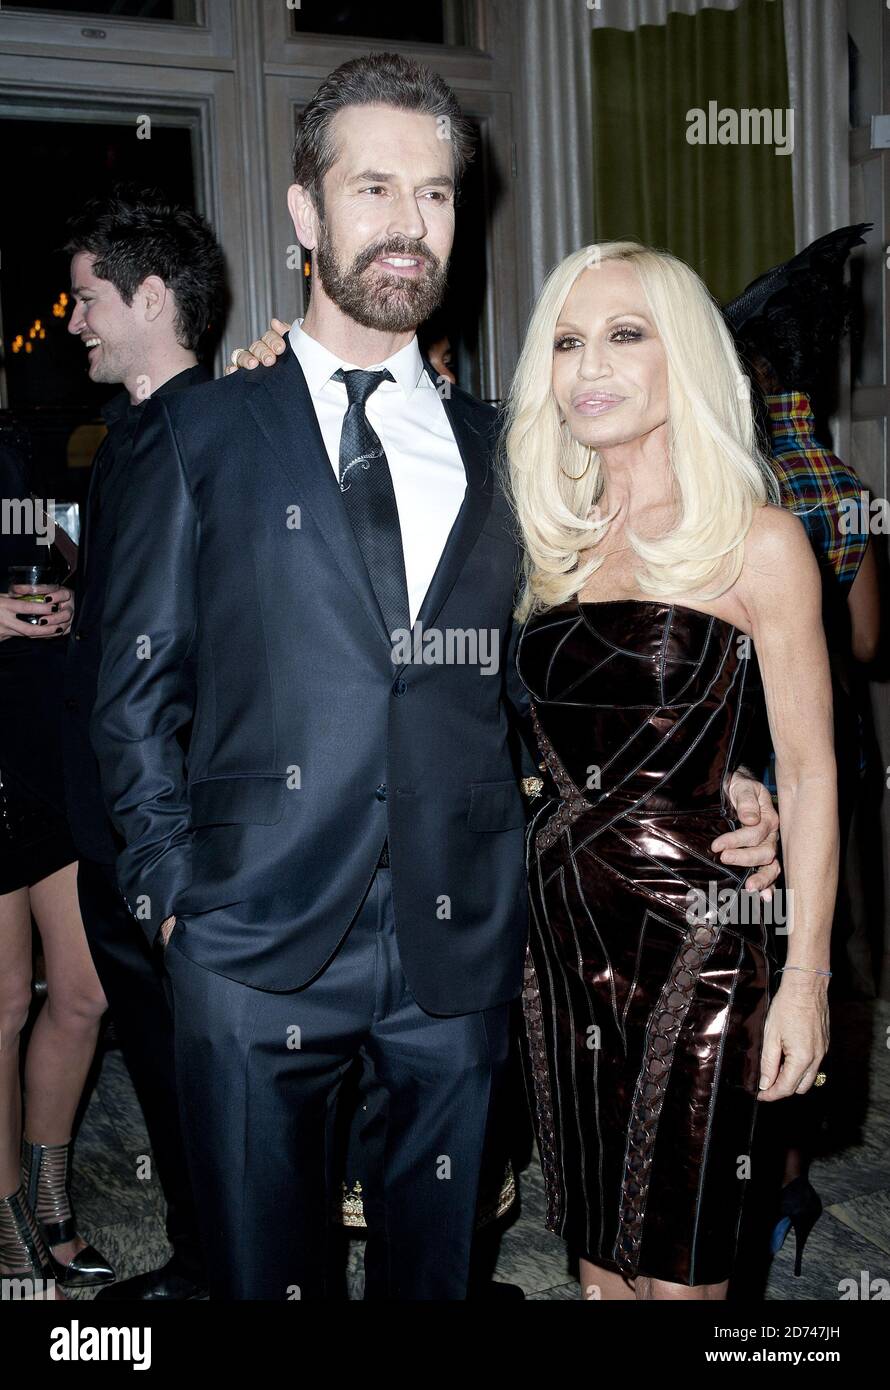 Rupert Everett and Donatella Versace attending the Central Saint Martinâ€™s 20:20 Fashion Fund dinner, at the Connaught Hotel in central London.  Stock Photo